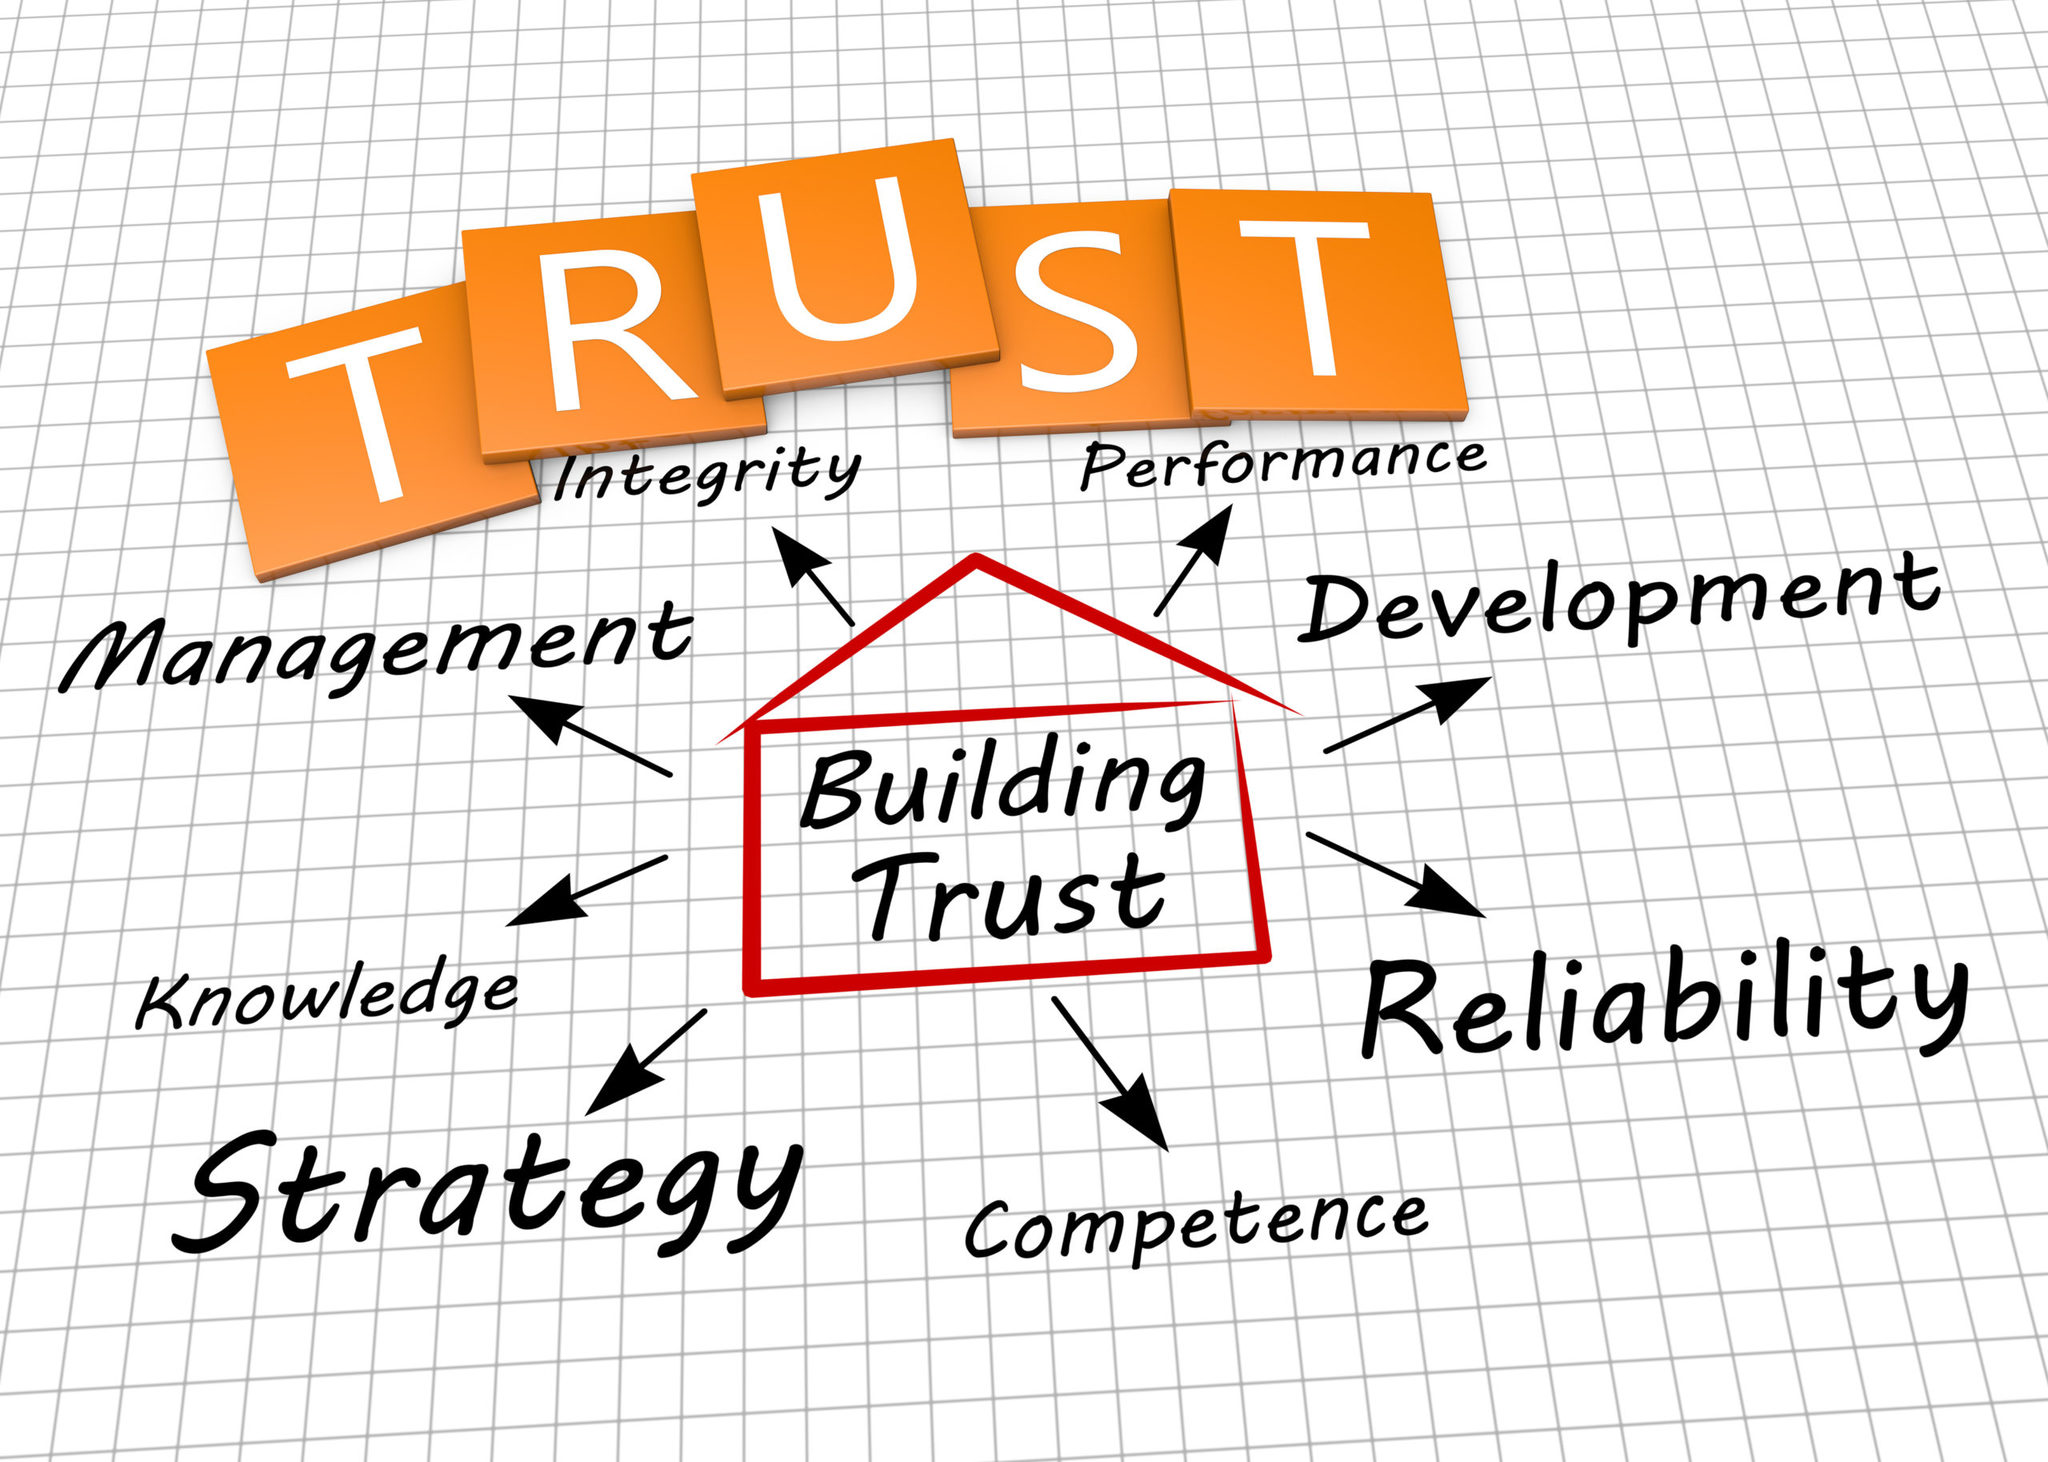 Trust. How to build Trust. Крепс Билдинг Траст.